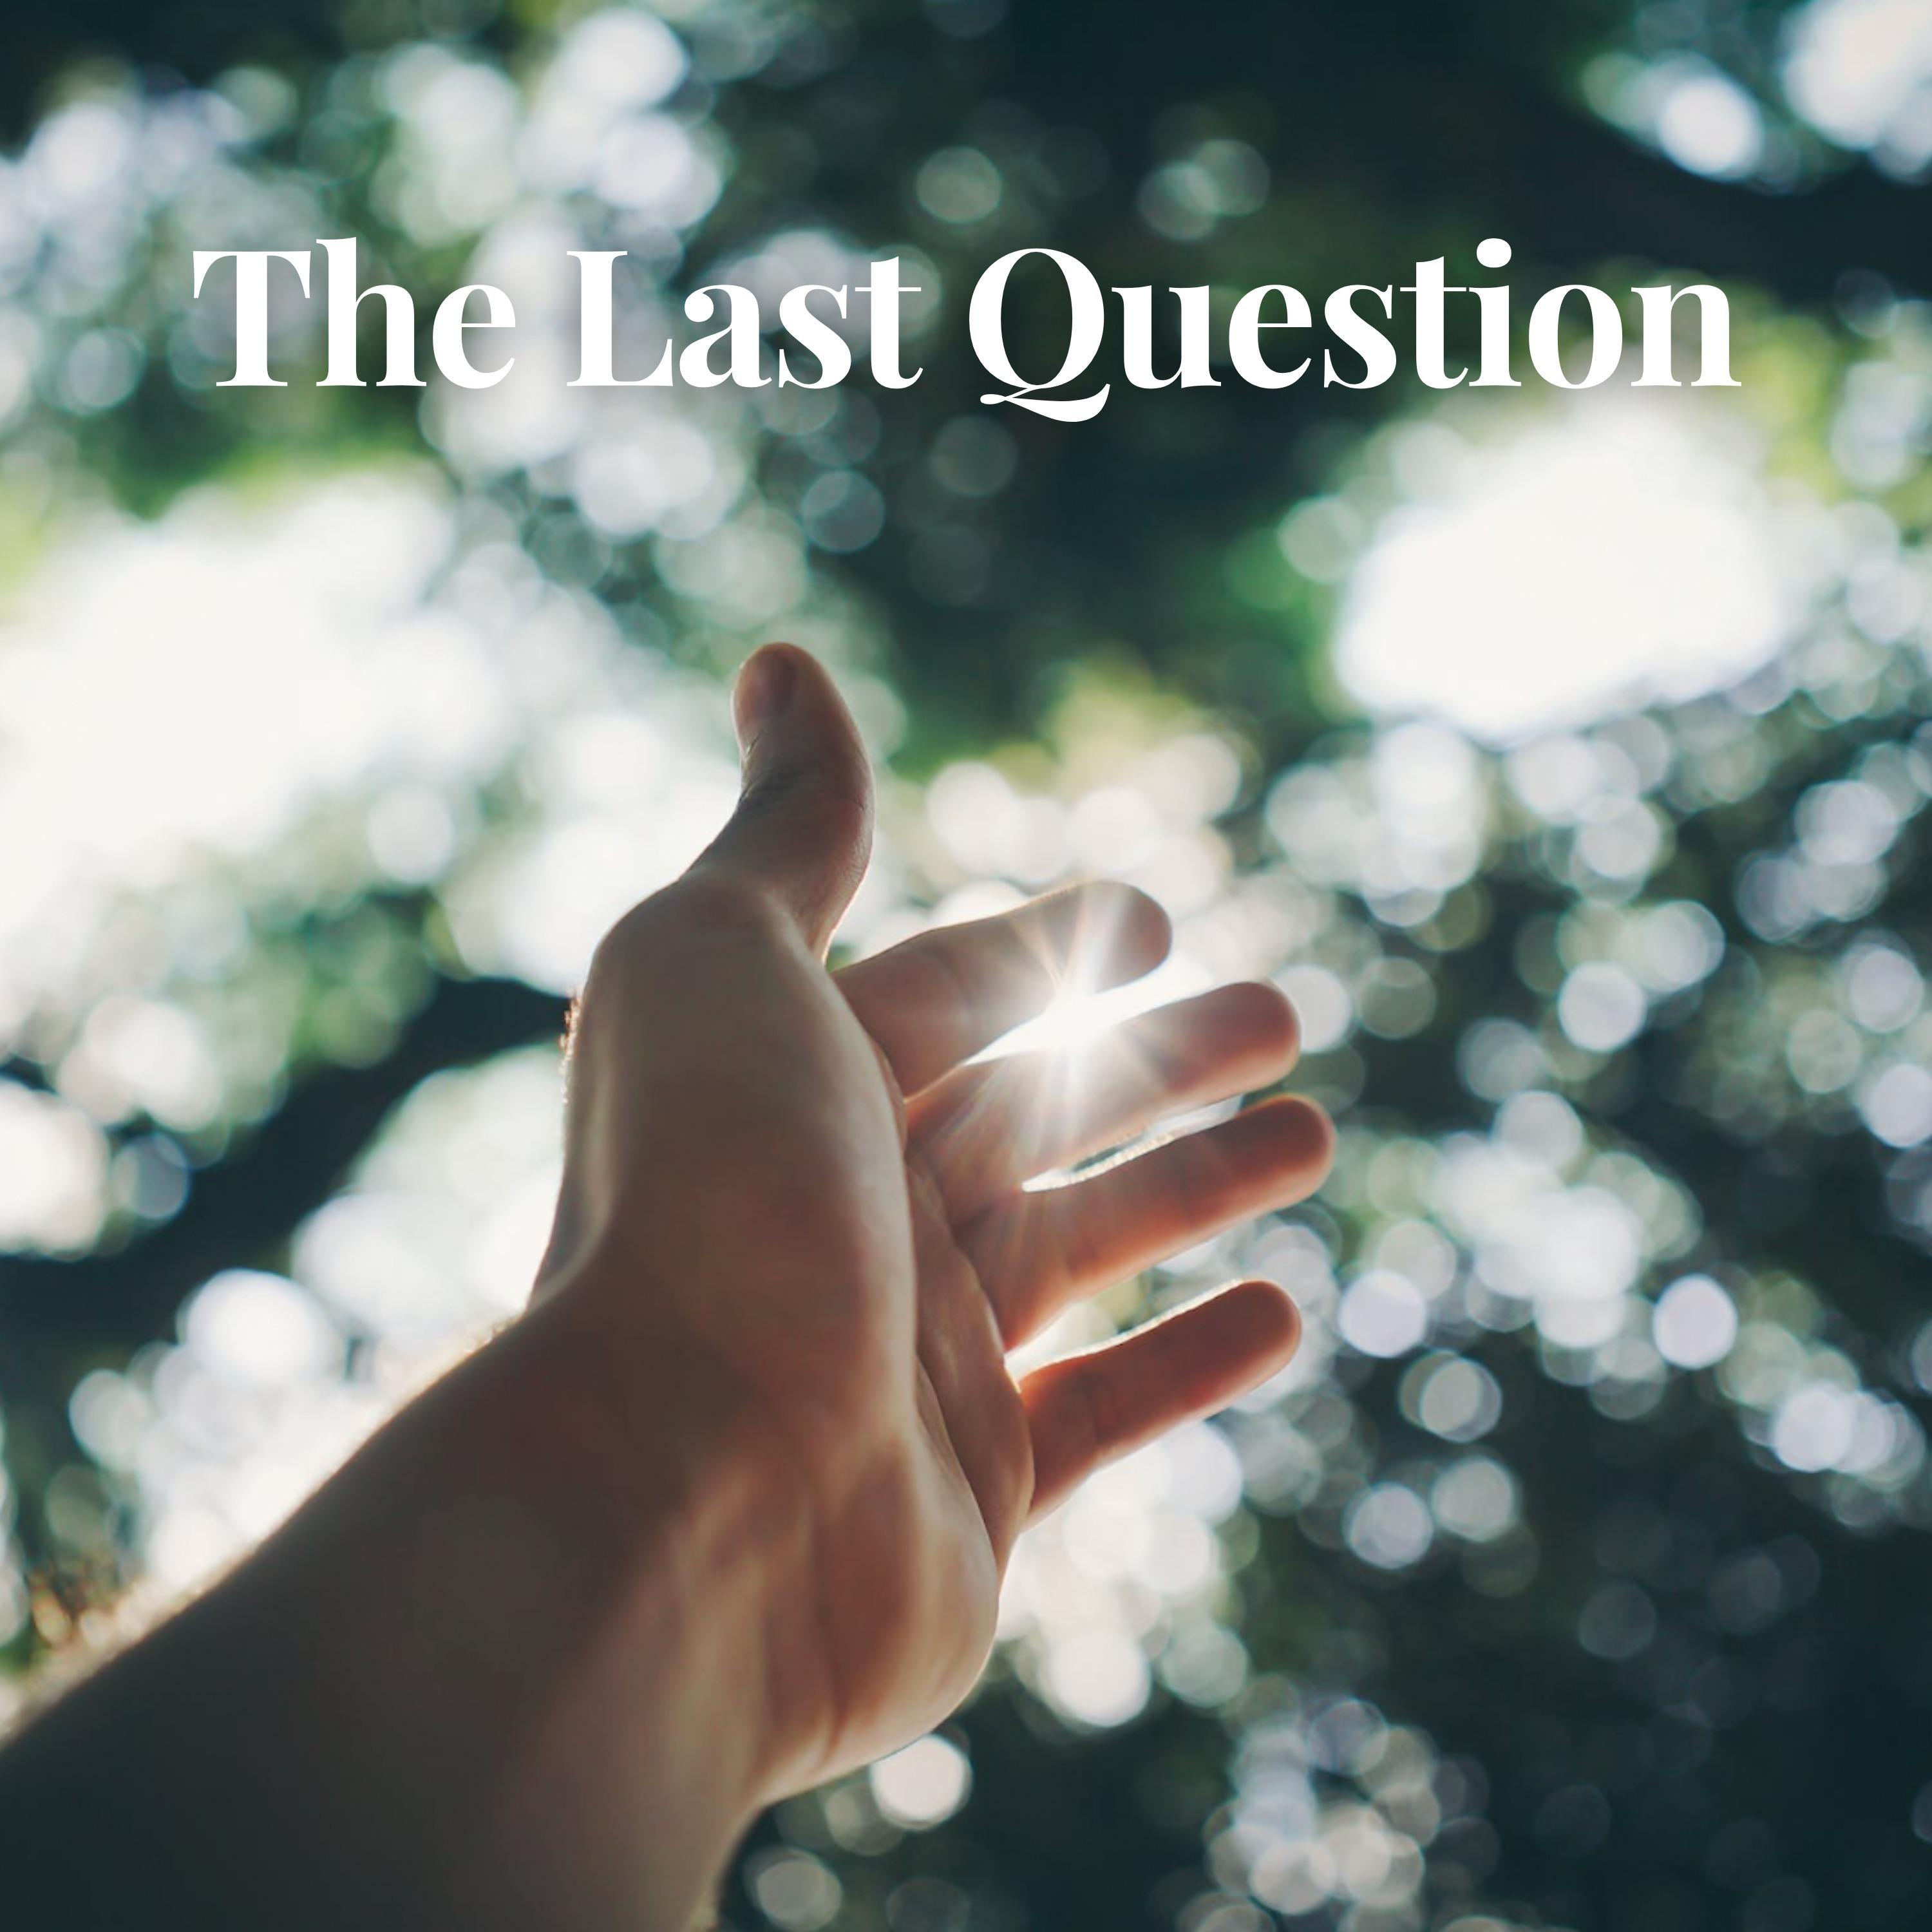 The Last Question